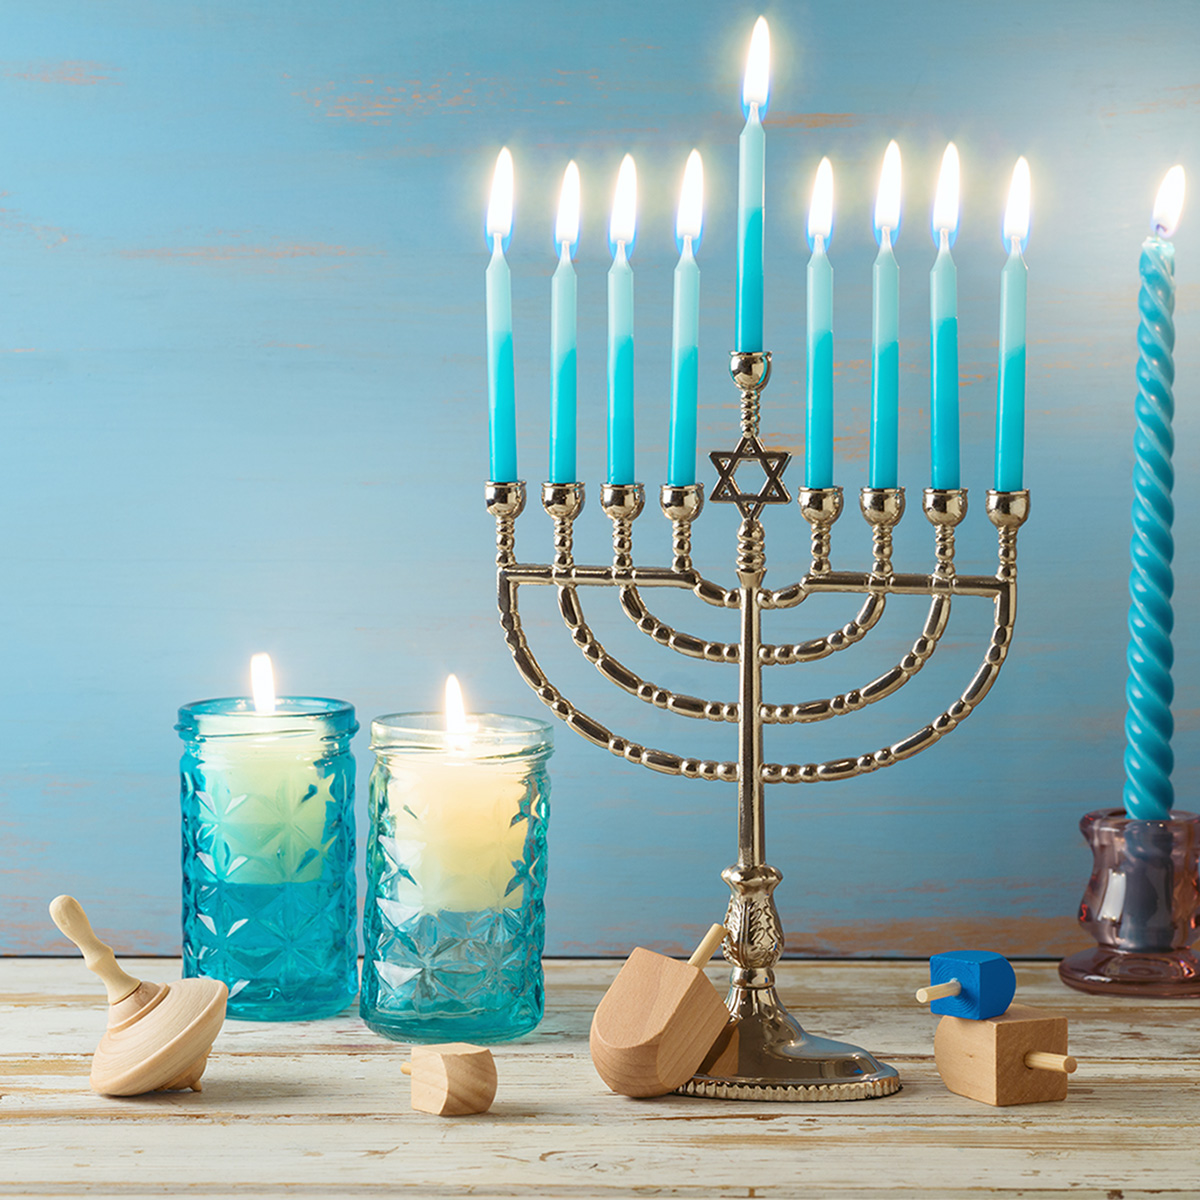 8 Nights Of Hanukkah Gifts For Everyone On Your List